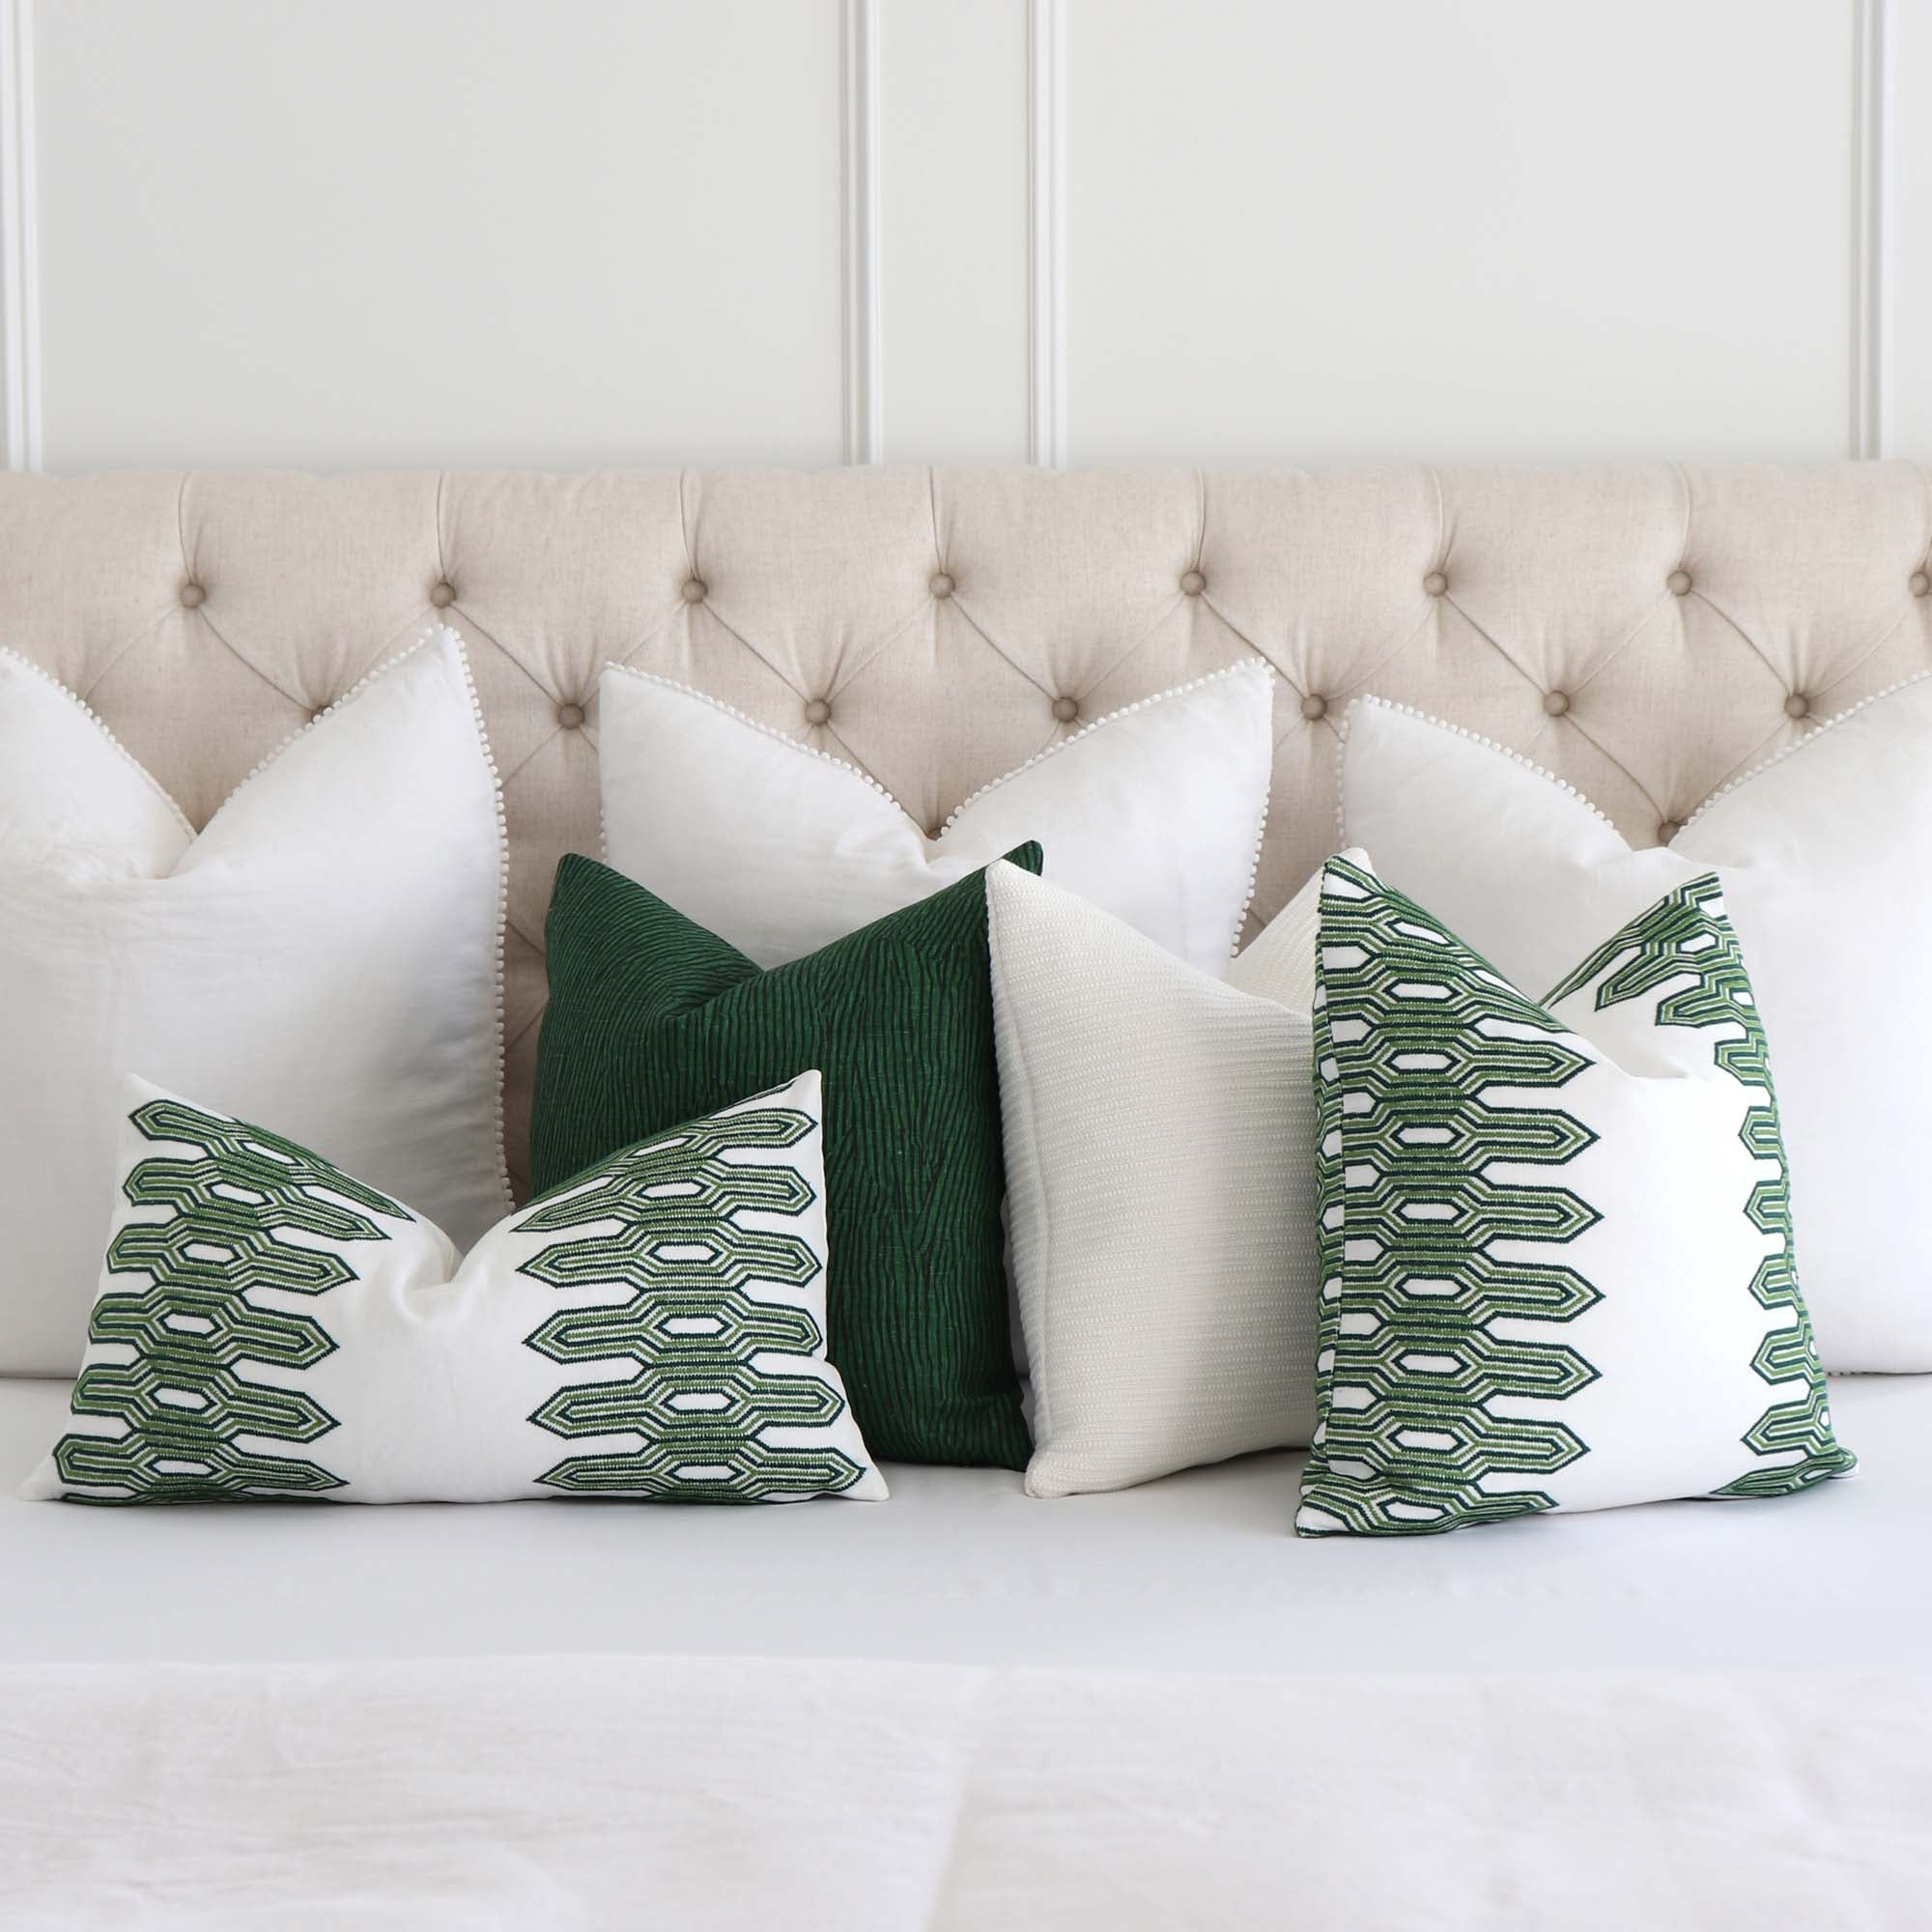 Pillow Insert Size Guide - Chloe & Olive